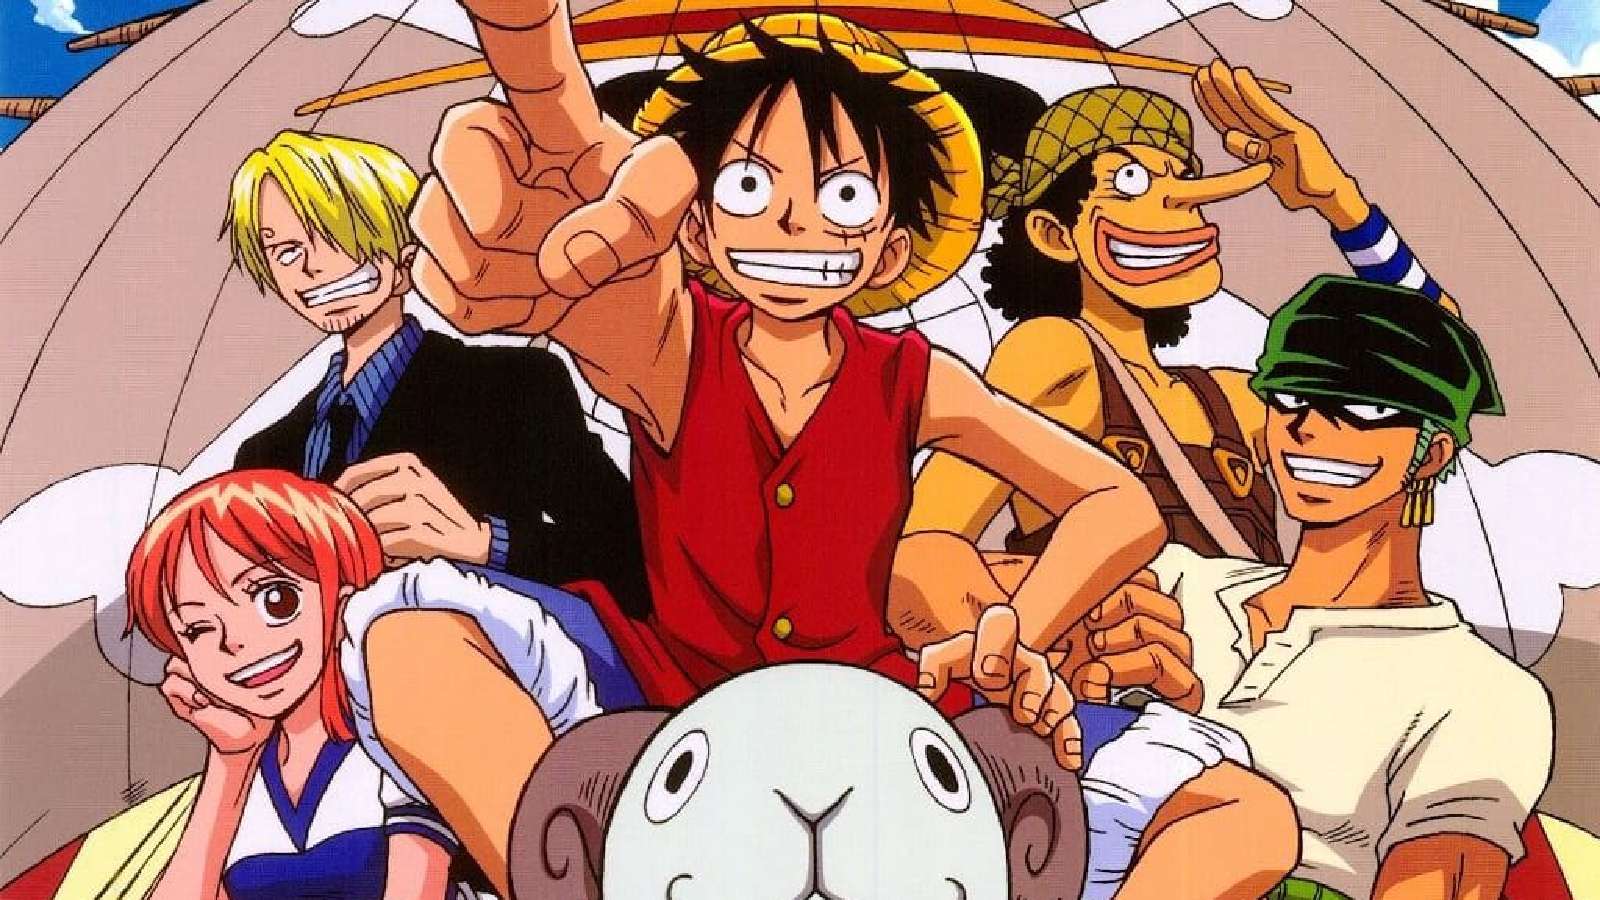 The Strongest 'One Piece' Villain Is Not the One You're Thinking